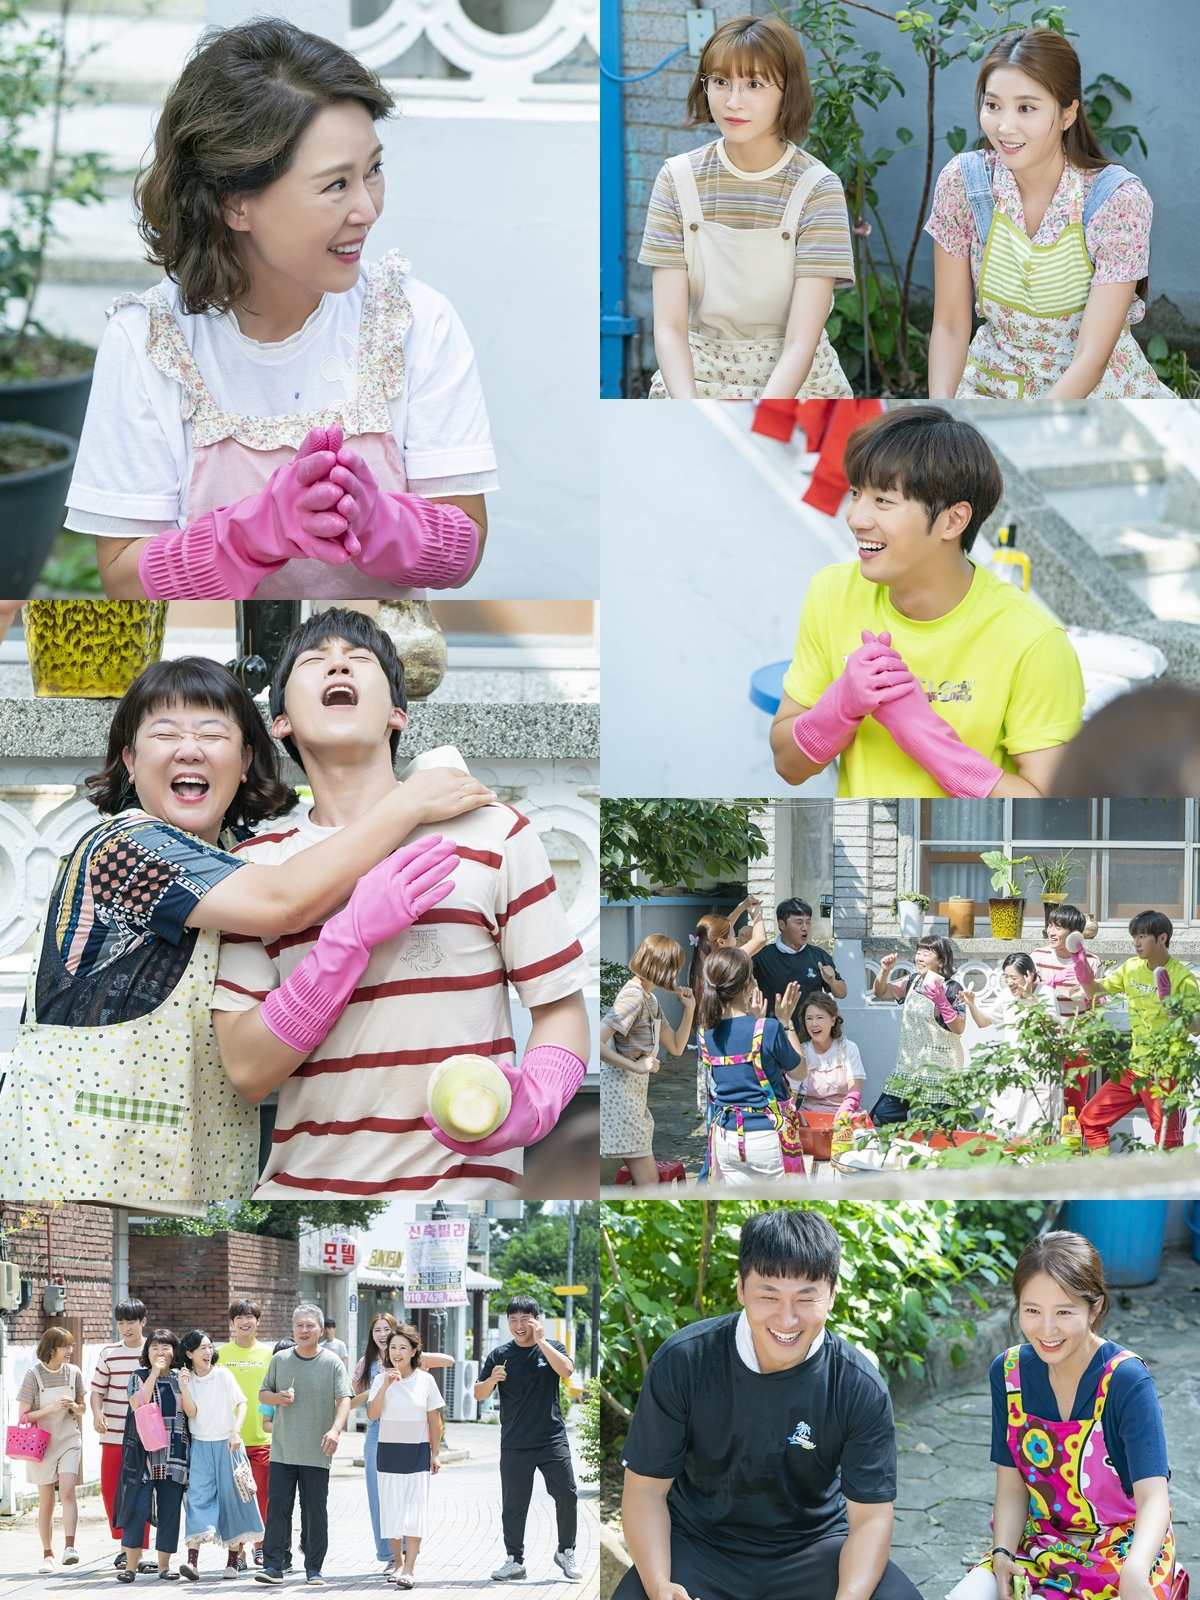 The daily life of the cheerful Songga is revealed.In the 89th and 90th KBS2 weekend drama Ive Goed Once (playplayplay by Yang Hee-seung, Ange, Director Lee Jae-sang, Production Studio Dragon, Bon Factory) broadcast on 29th, Songganes family and their score to score a warm daily life (?)The struggling Lee Sang-yeob (played by Yoon Kyu-Jin) and Lee Sang Yi (played by Yun Jae-Suk) brothers will cause laughter in the small screen.In the last broadcast, the images of Yoon Kyu-Jin (Lee Sang-yeob Boone) and Yun Jae-Suk (Lee Sang Yi Boone) who are trying to get permission for marriage were drawn and warmed up.Yoon Kyu-Jin conveyed the true heart that he had not told about Song Na-hees legacy, vowed not to make a mistake again to Jang Ok-bun (Cha Hwa-yeon), and Yun Jae-Suk played a role as the youngest child, making cute surprises such as buying bouquets and visiting Songane.The four entangled love lines are gradually unravelling the threads, and the images of Yoon Kyu-Jin and Yun Jae-Suk brothers who are visiting Songane to help work are captured and stimulate the curiosity of viewers.When I sing together and enjoy a leisurely time, such as going to the bathhouse, I feel warm family love and feel the hearts of viewers warmly.On this day, I wonder why Song family and Yoon Hyung-jae gathered together, and who invited Yoon Kyu-Jin and Yun Jae-Suk to their home.Also, there is a growing expectation for the broadcast tomorrow (29th) because there is a strange situation and an unexpected crisis in front of those who are enjoying a happy time on this day.The direction of special chemistry and unmatchable development can be seen at 89 and 90 times of I went once which is broadcasted at 7:55 pm on the 29th.